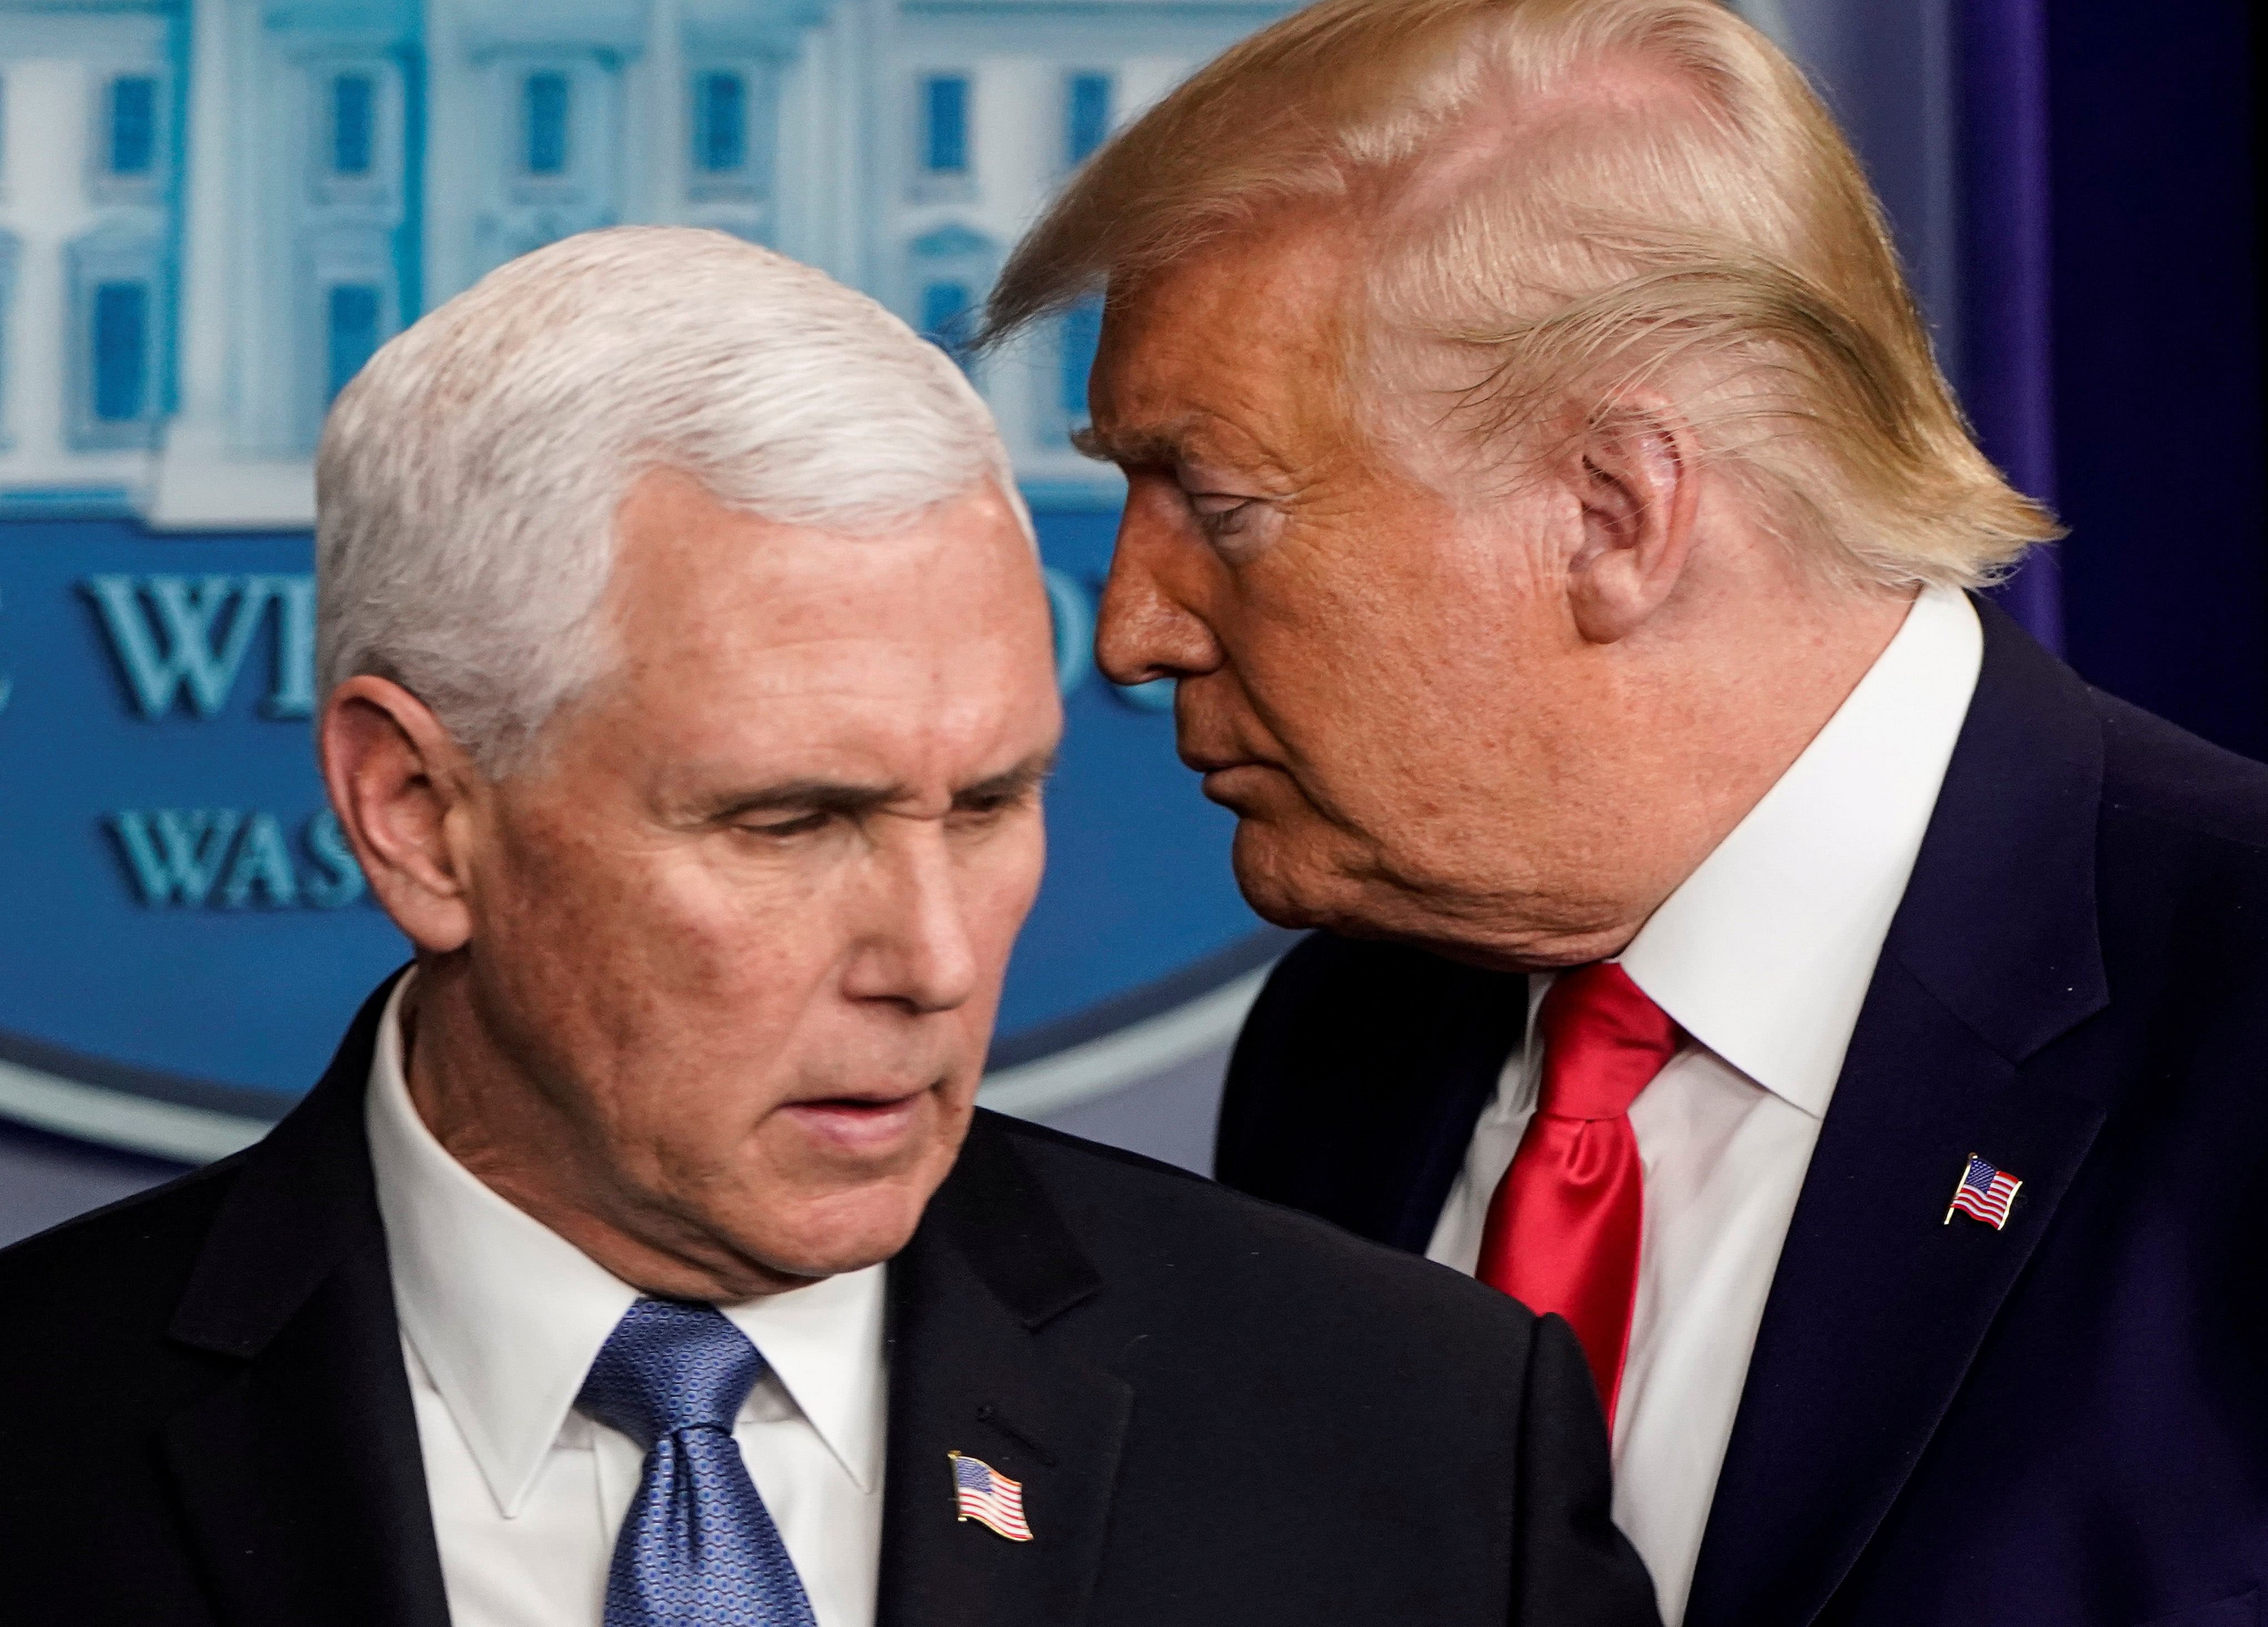 President Donald Trump put Pence in charge of the US response last week, amid rising complaints that the administration had been slow to prepare for the virus's spread. (Credit: Reuters Photo)